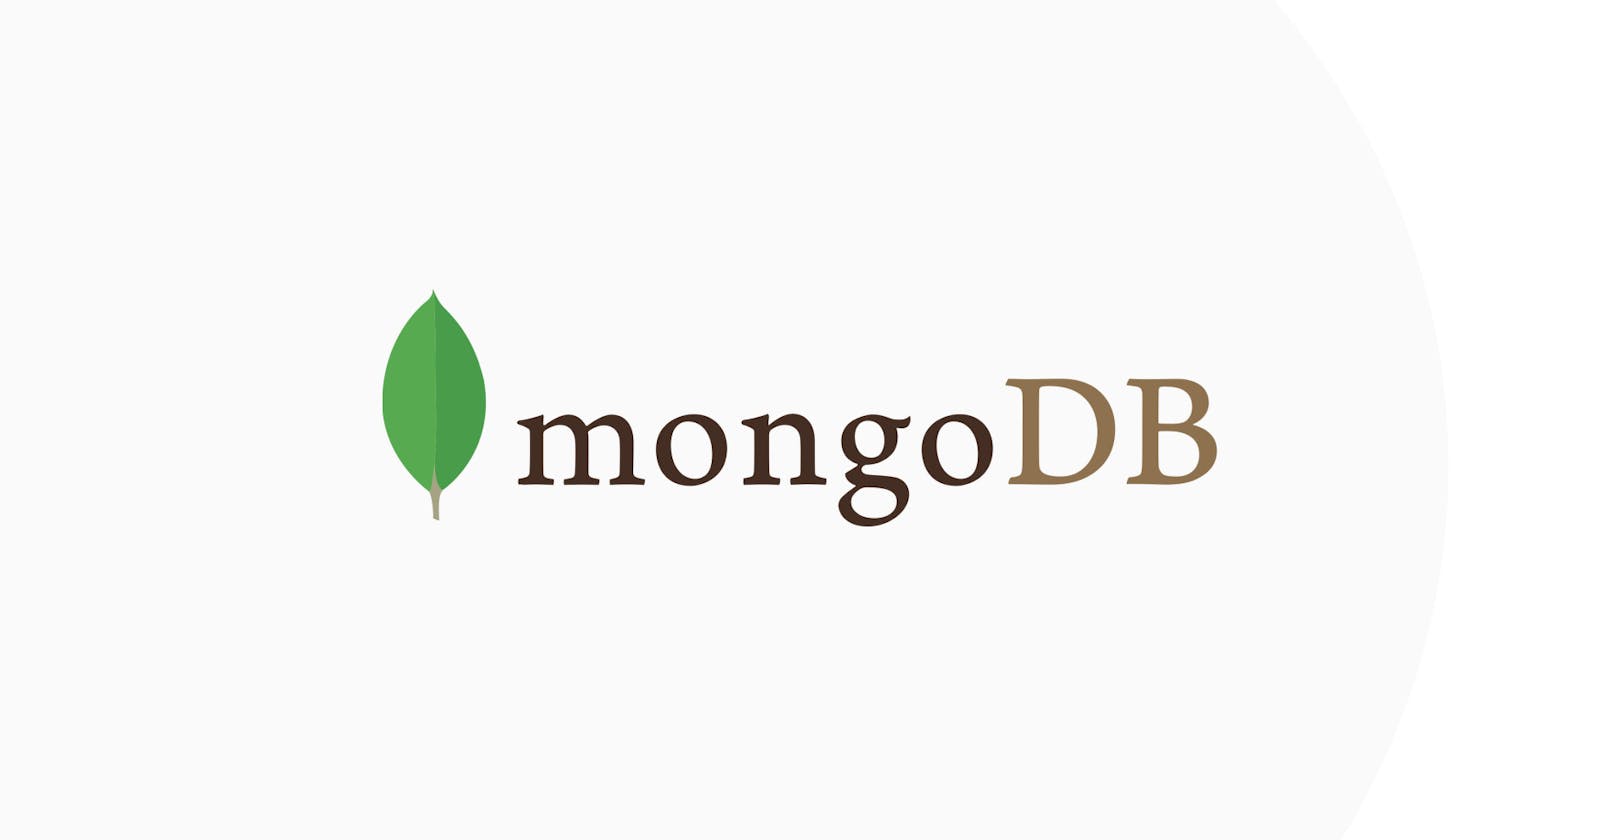 What Is Mongo DB?